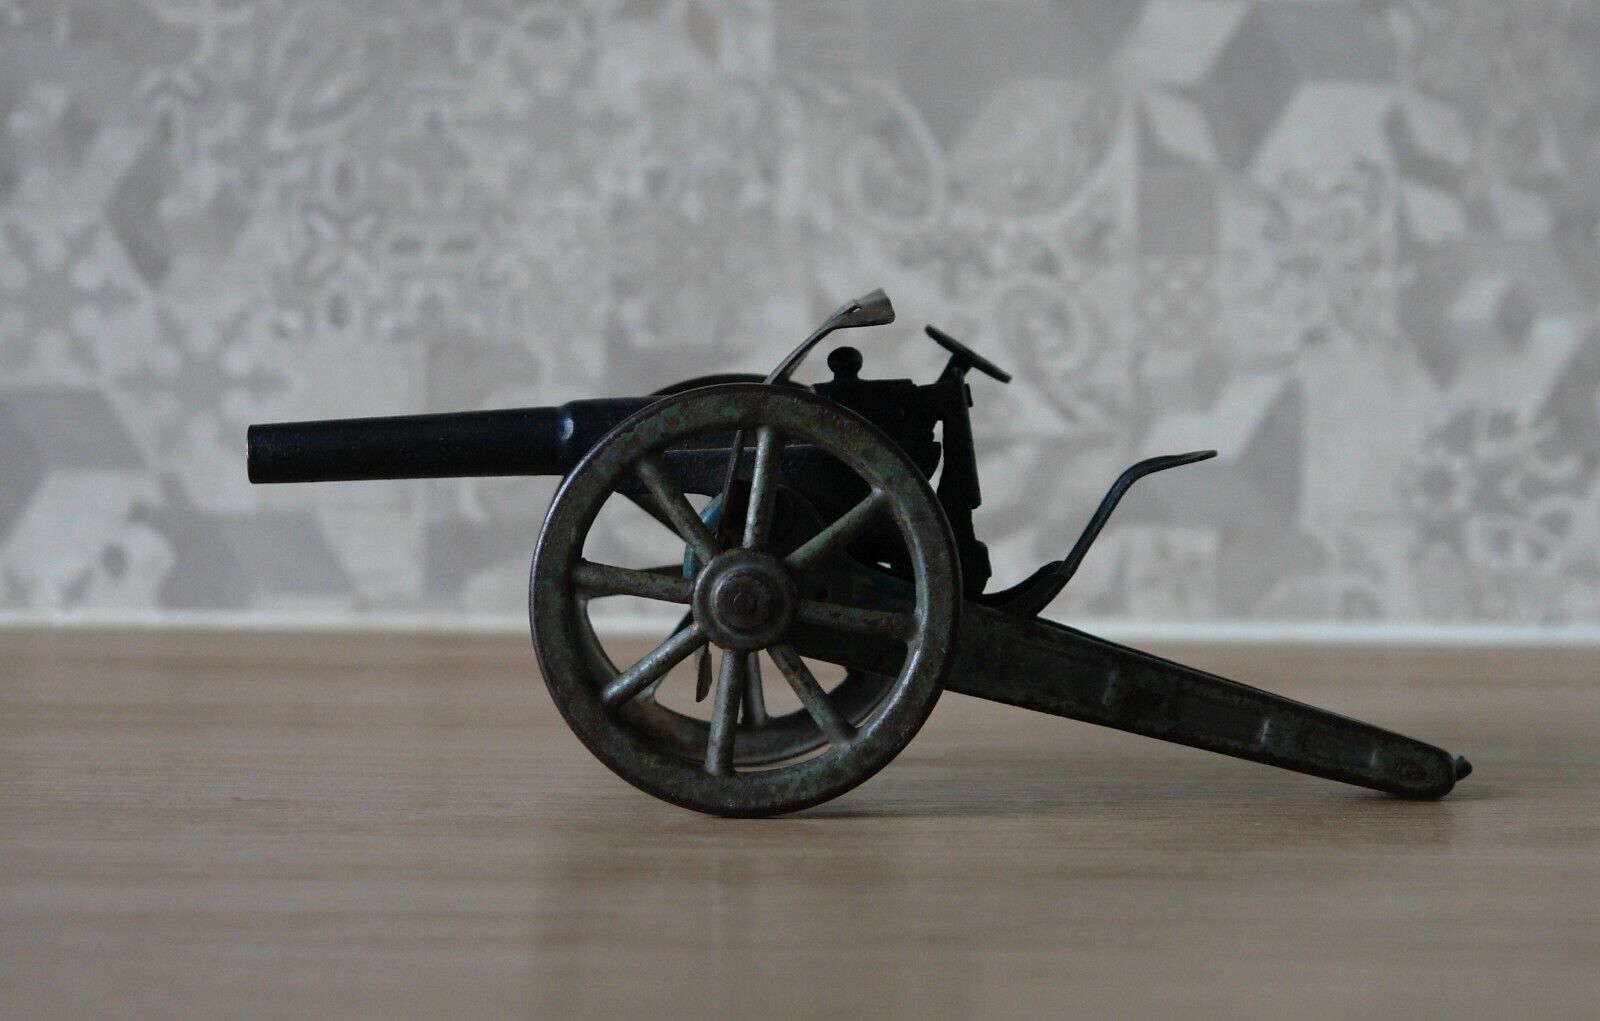 MINIATURE METAL CANNON GAV BRAND WITH ADJUSTABLE CANNON RISE - CIRCA 1950